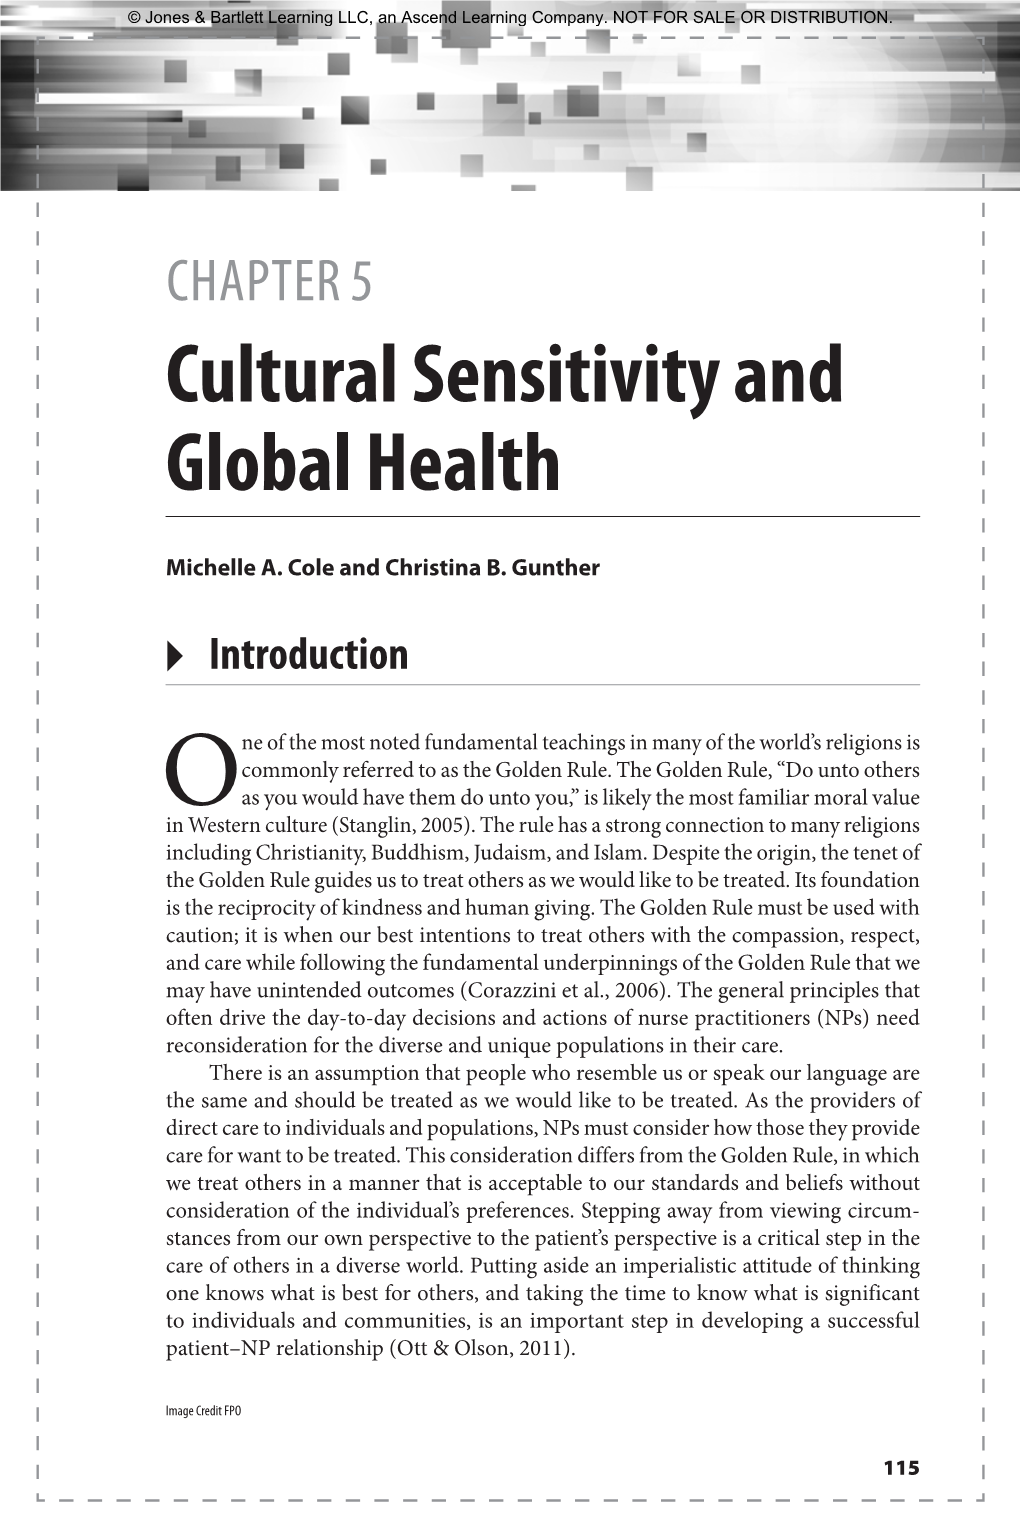 CHAPTER 5 Cultural Sensitivity and Global Health